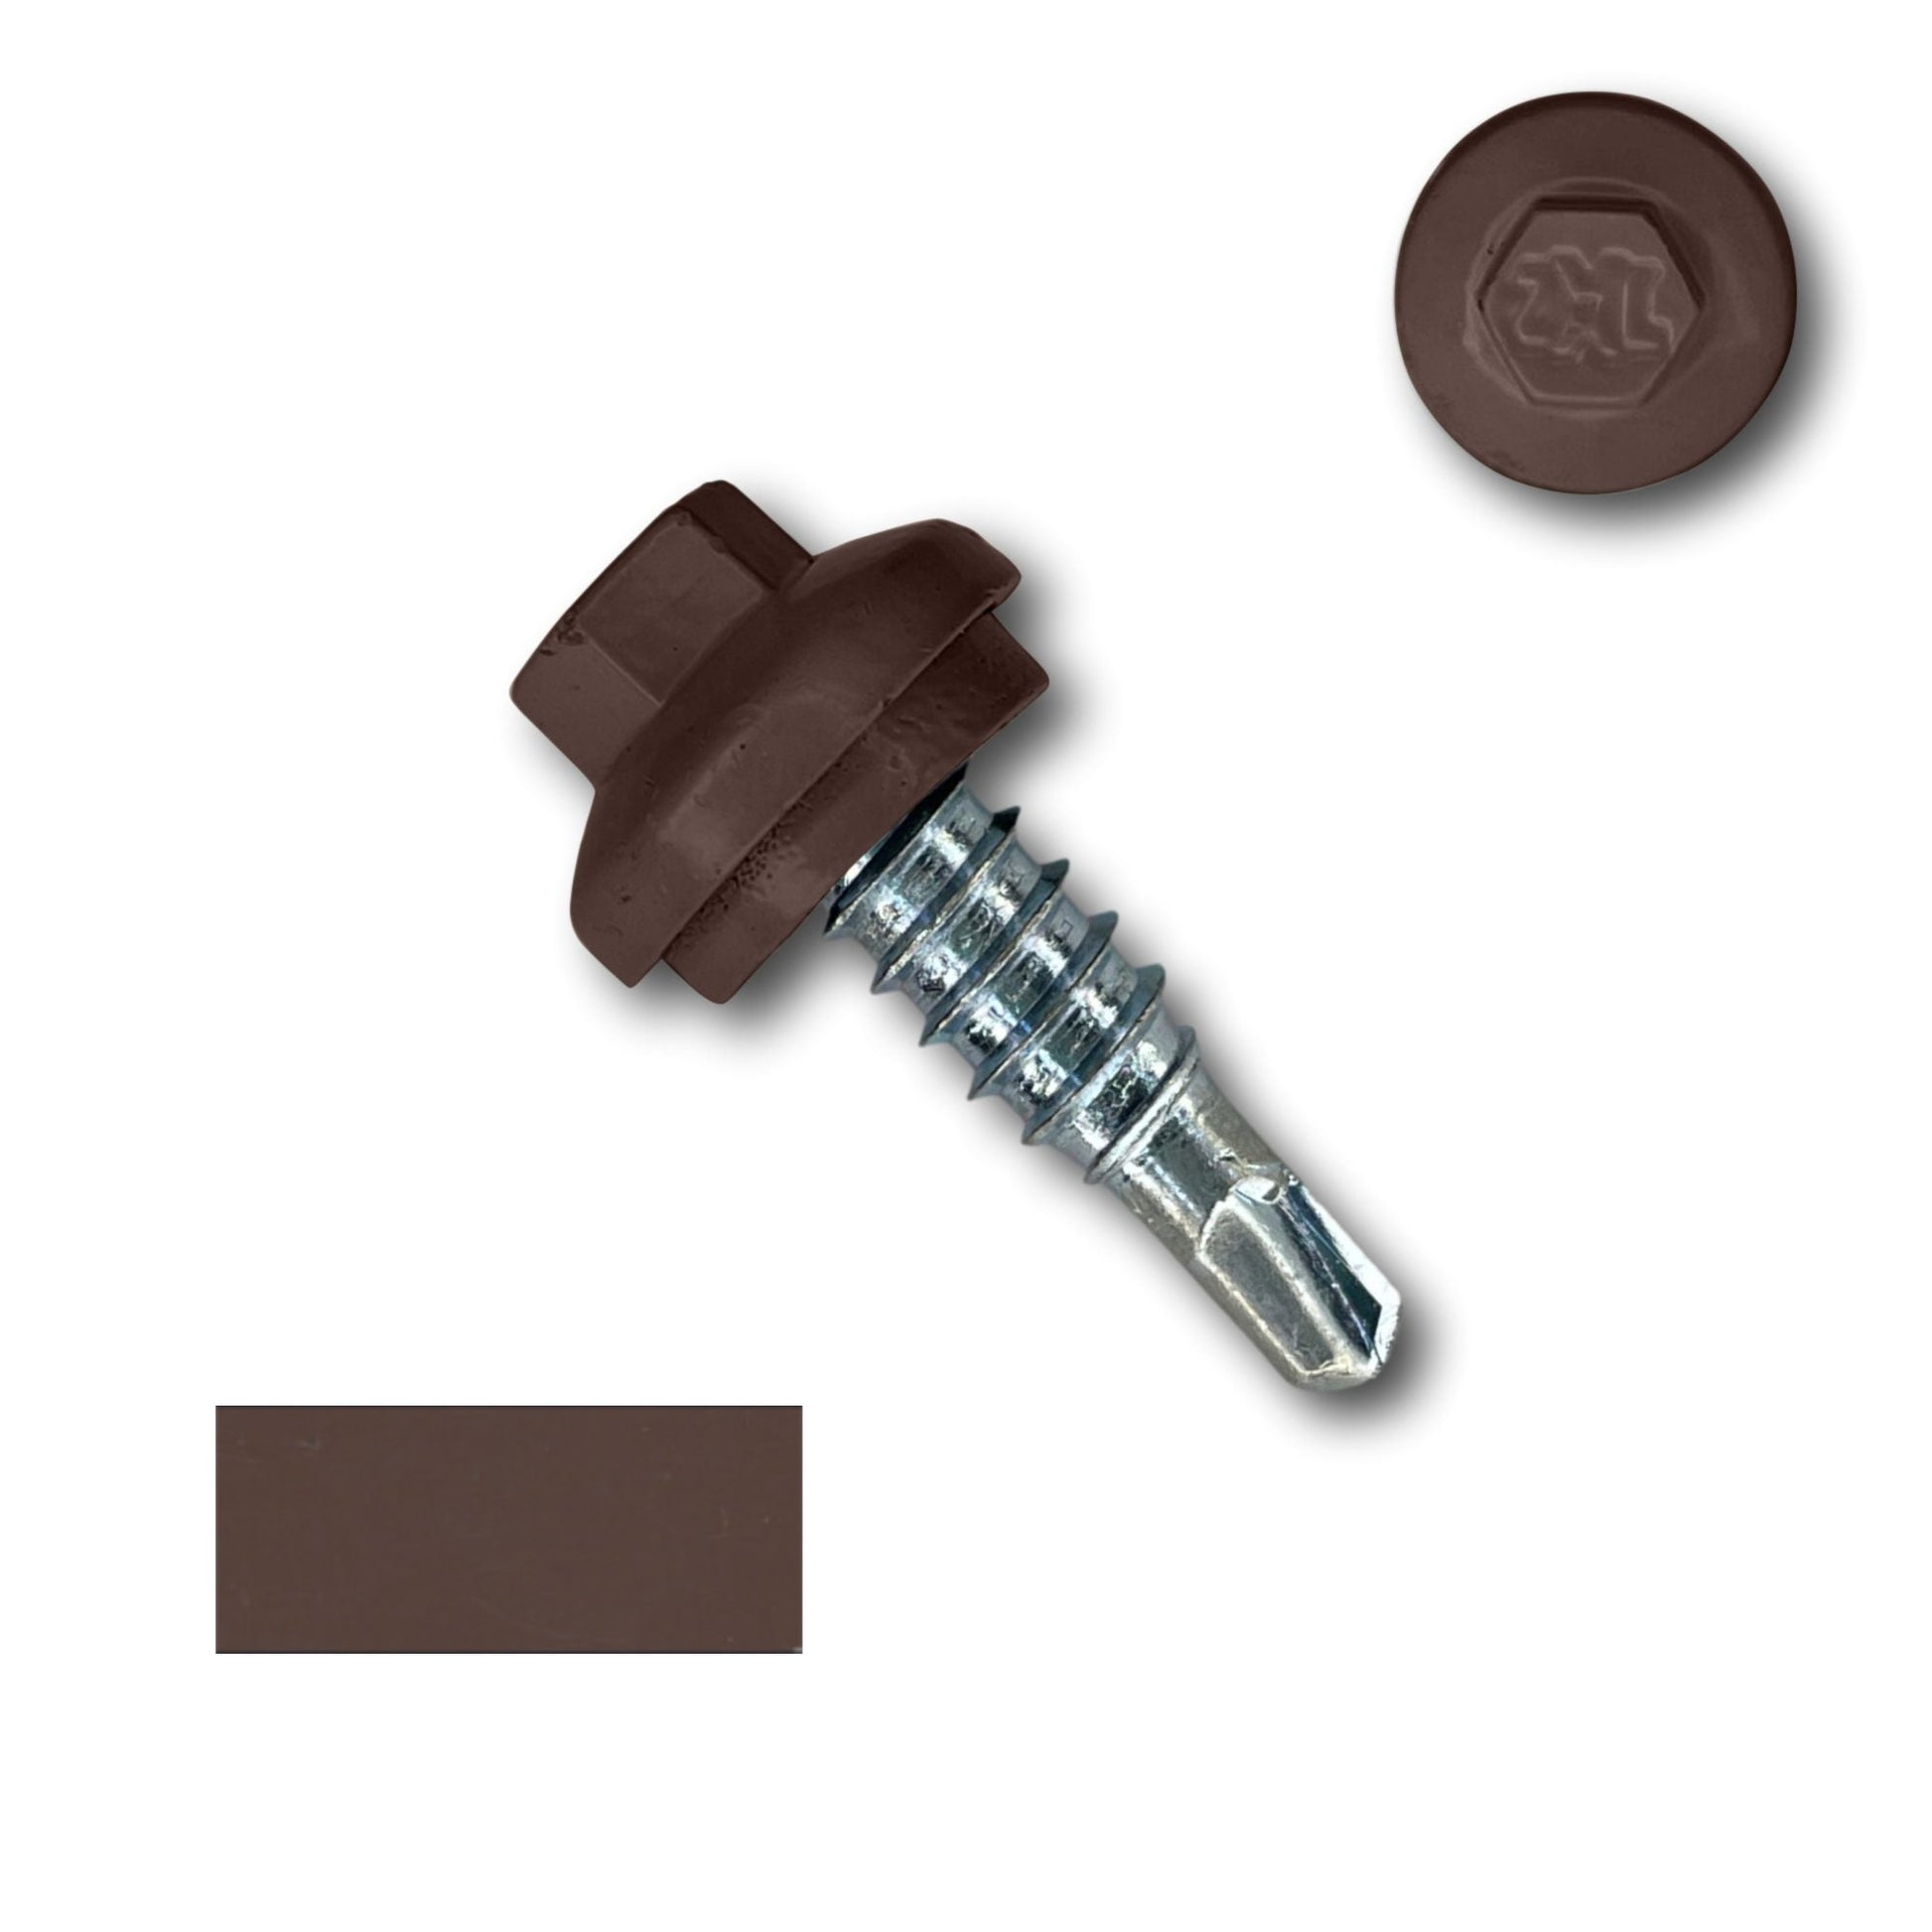 Close-up image of a Perma Cover #14 x 7/8" Stitch Lap ZXL Dome Cap Metal Building Screw, Self-Drilling - 250 Pack. The screw, ideal for secure fastening, features a shiny metallic thread. Also displayed are a brown cap that fits over the head of the screw and a rectangular brown color sample matching the screw head.